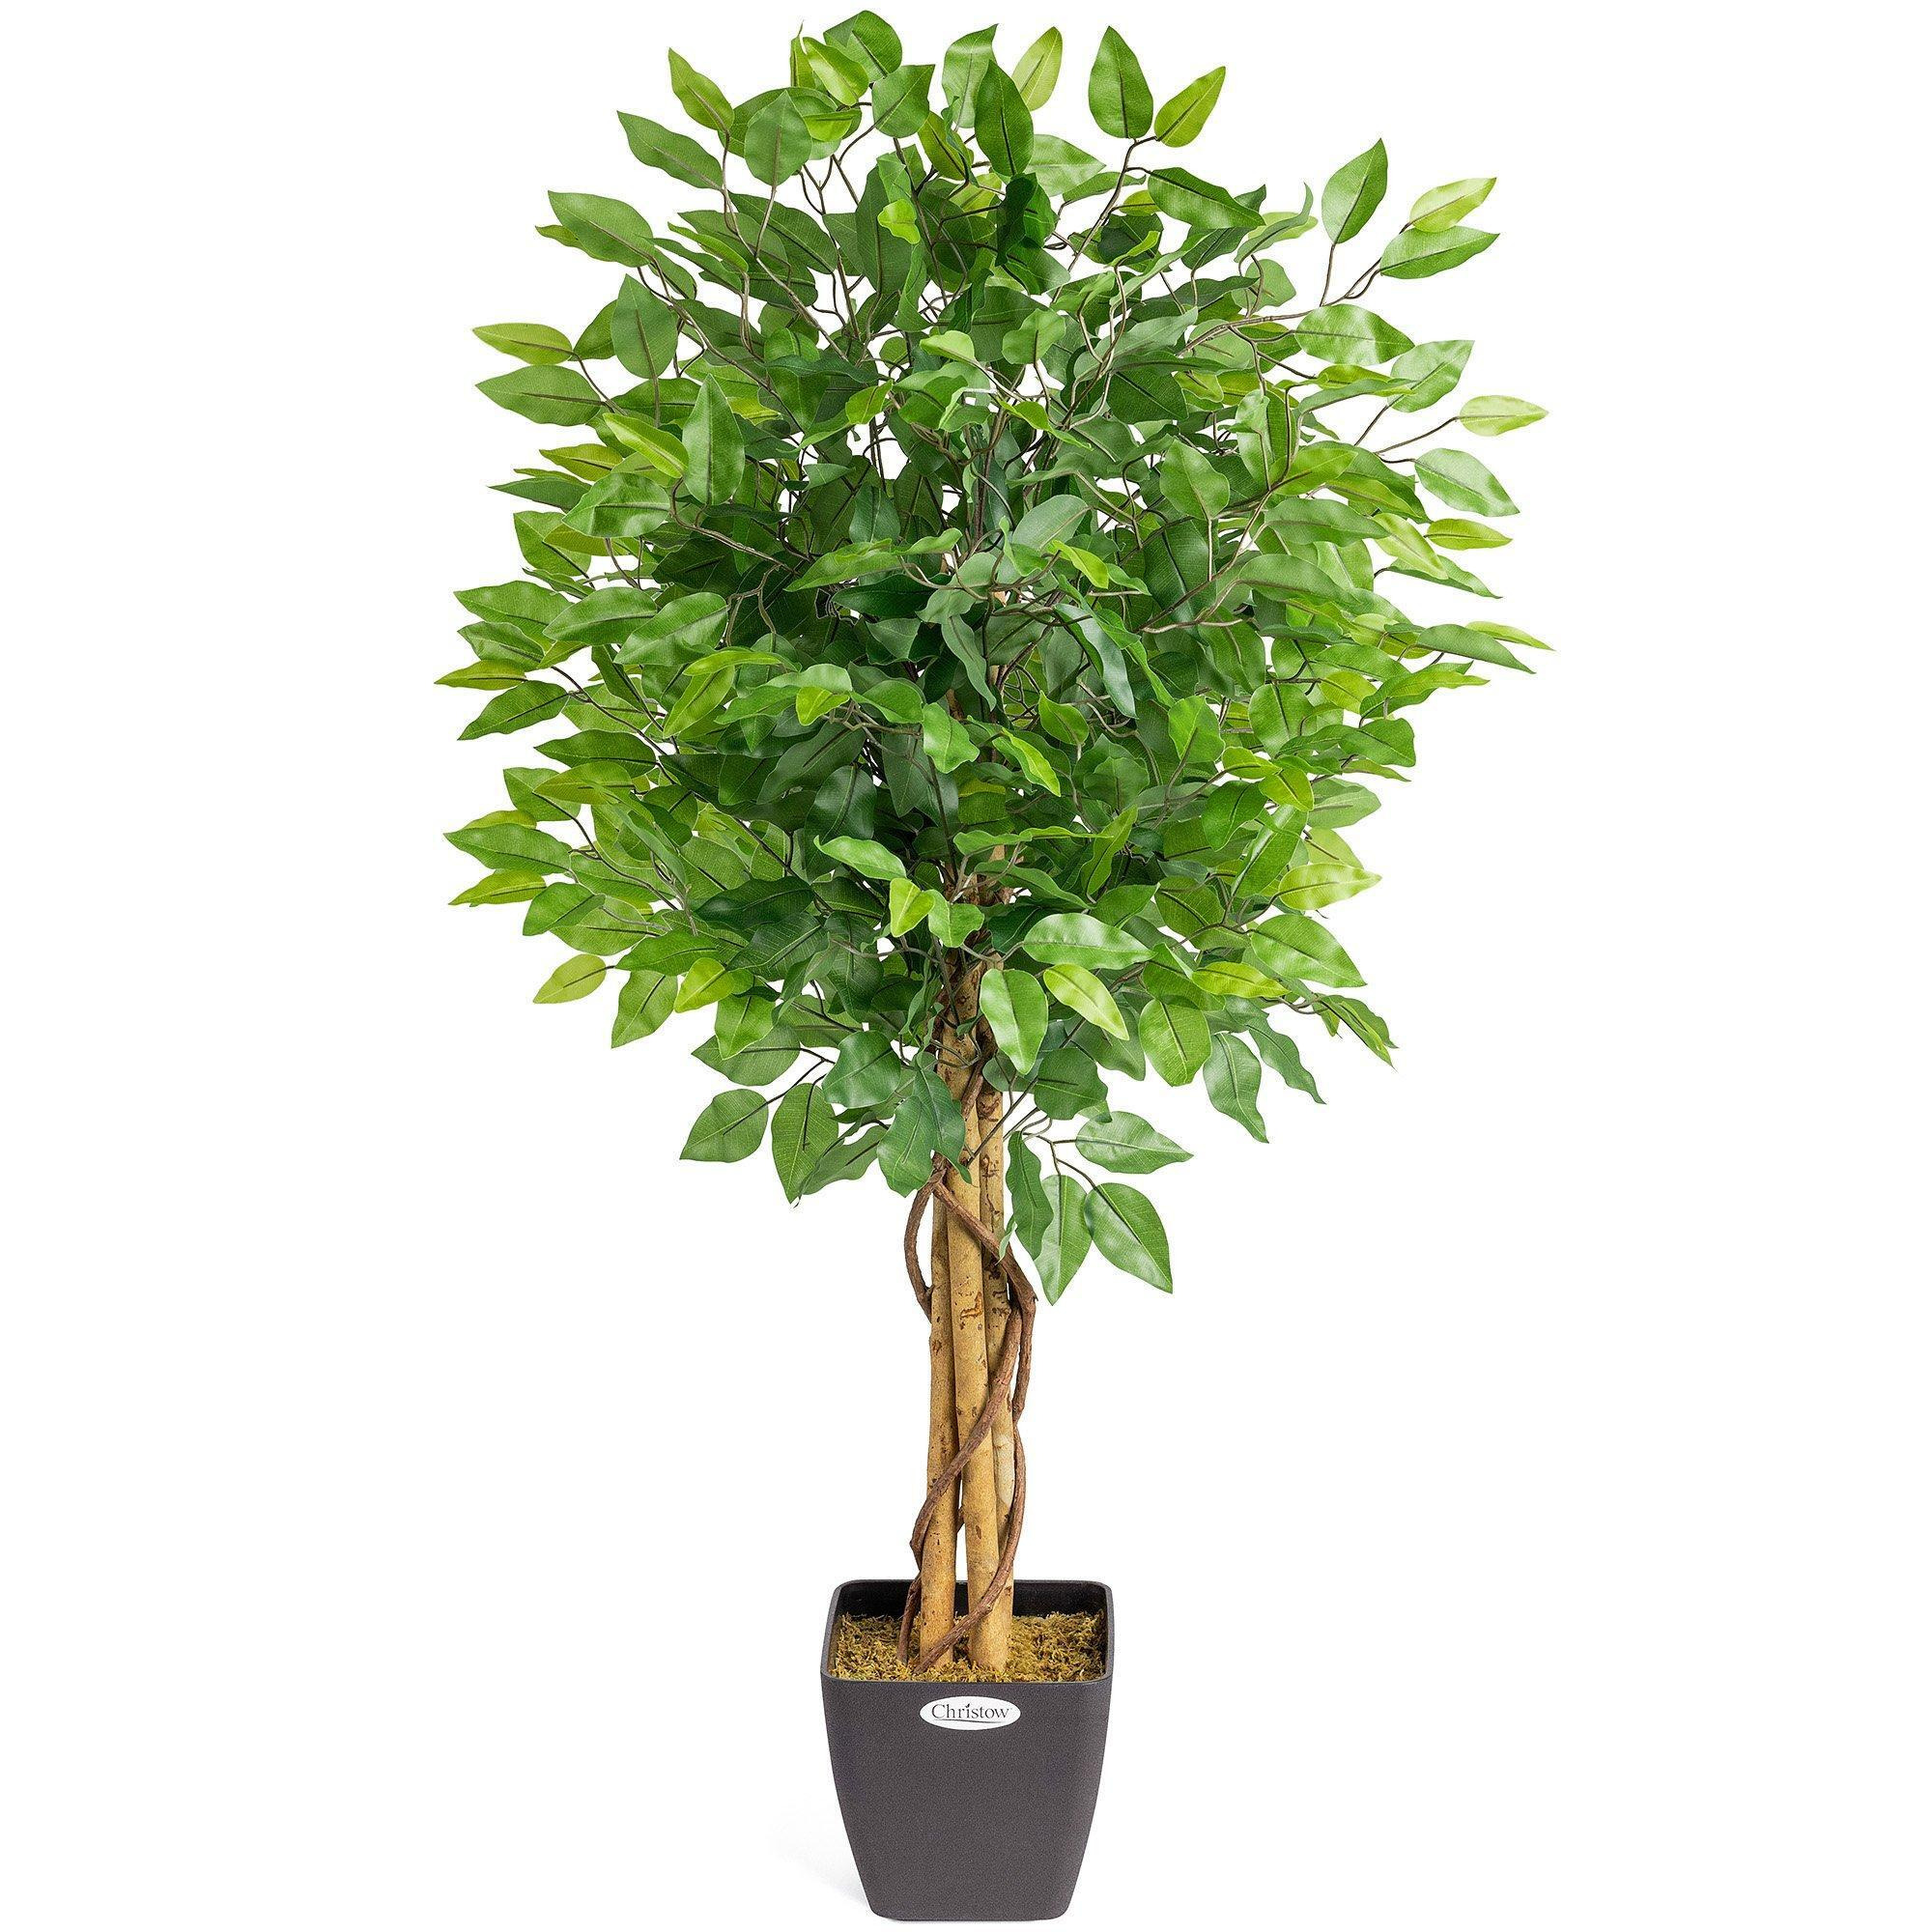 Artificial Ficus Tree Realistic Faux House Plant Decoration in Pot - image 1